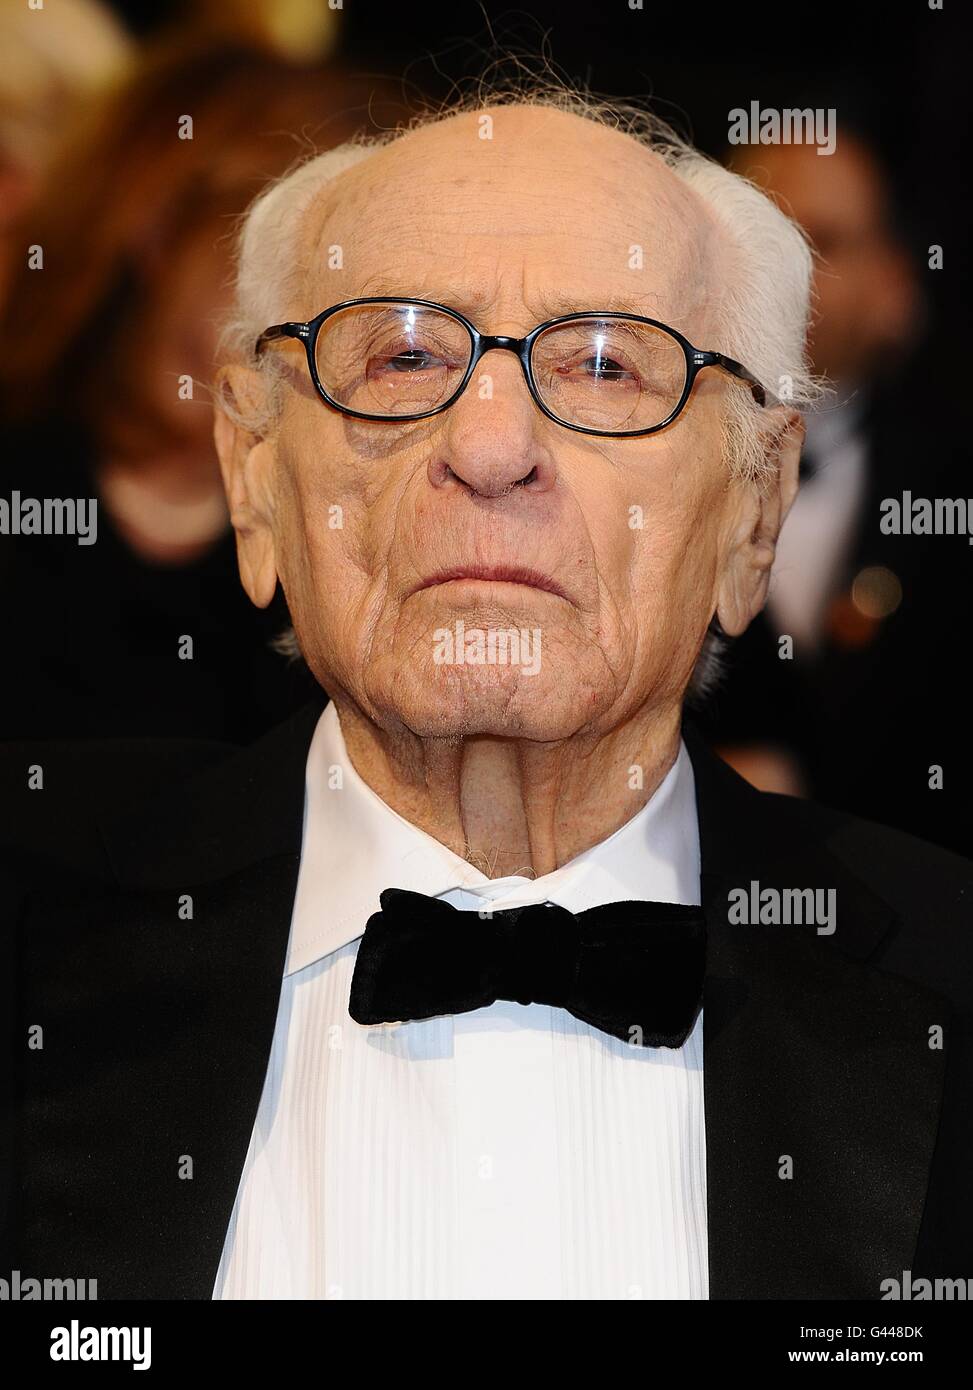 Eli Wallach arriving for the 83rd Academy Awards at the Kodak Theatre, Los Angeles. Stock Photo